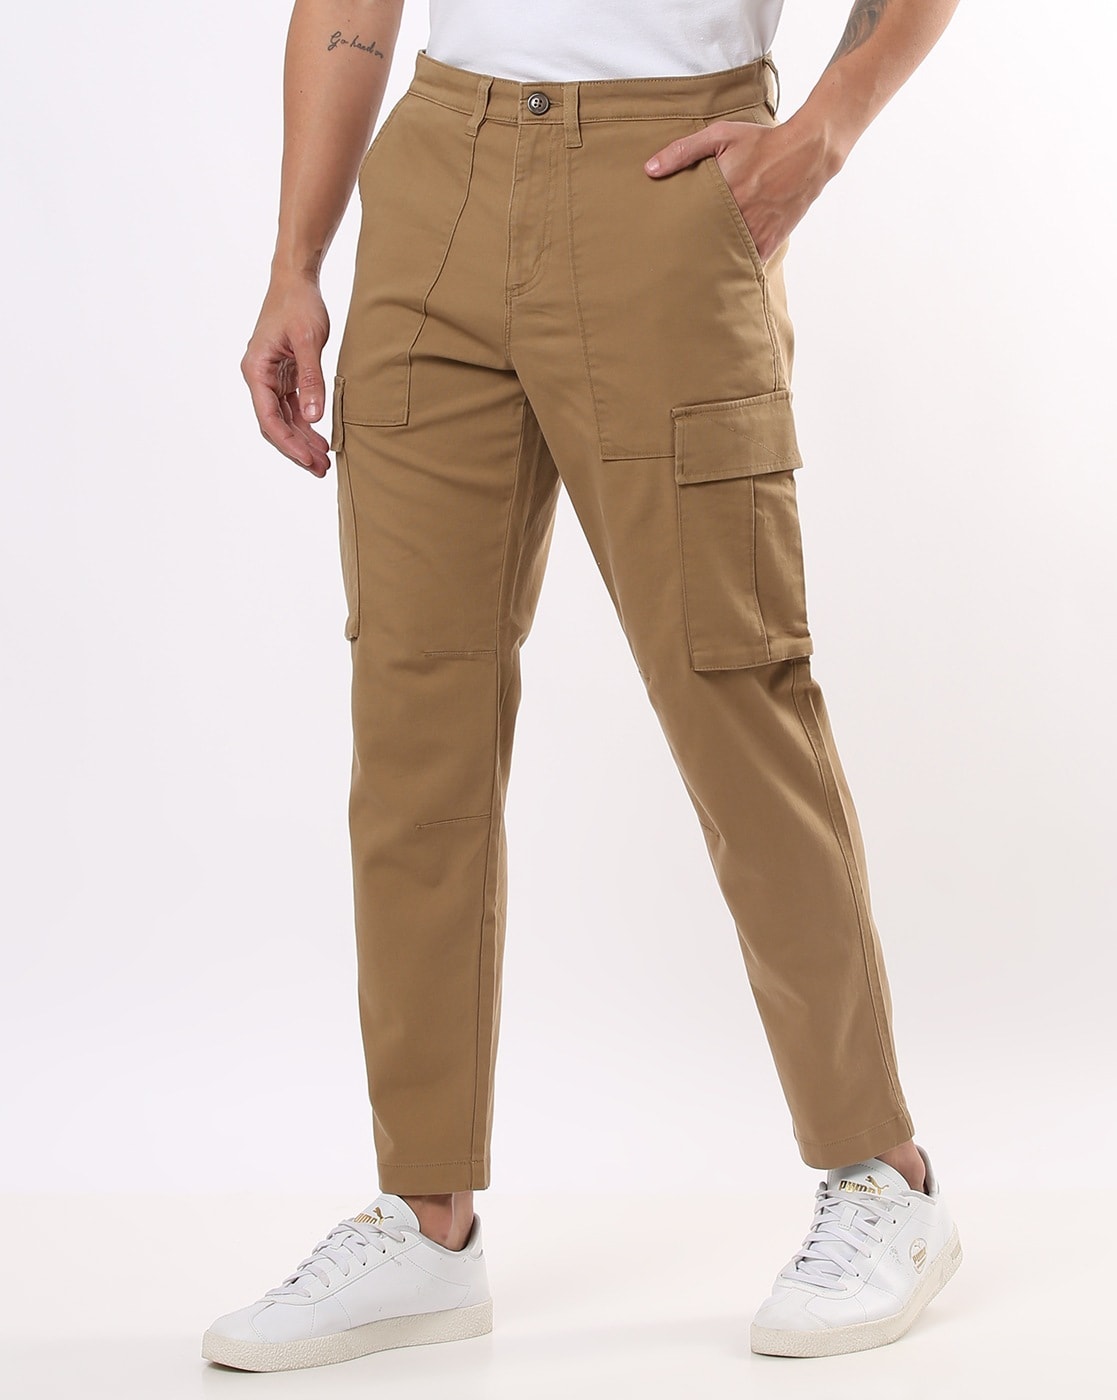 Buy Khaki Trousers  Pants for Men by ALTHEORY Online  Ajiocom